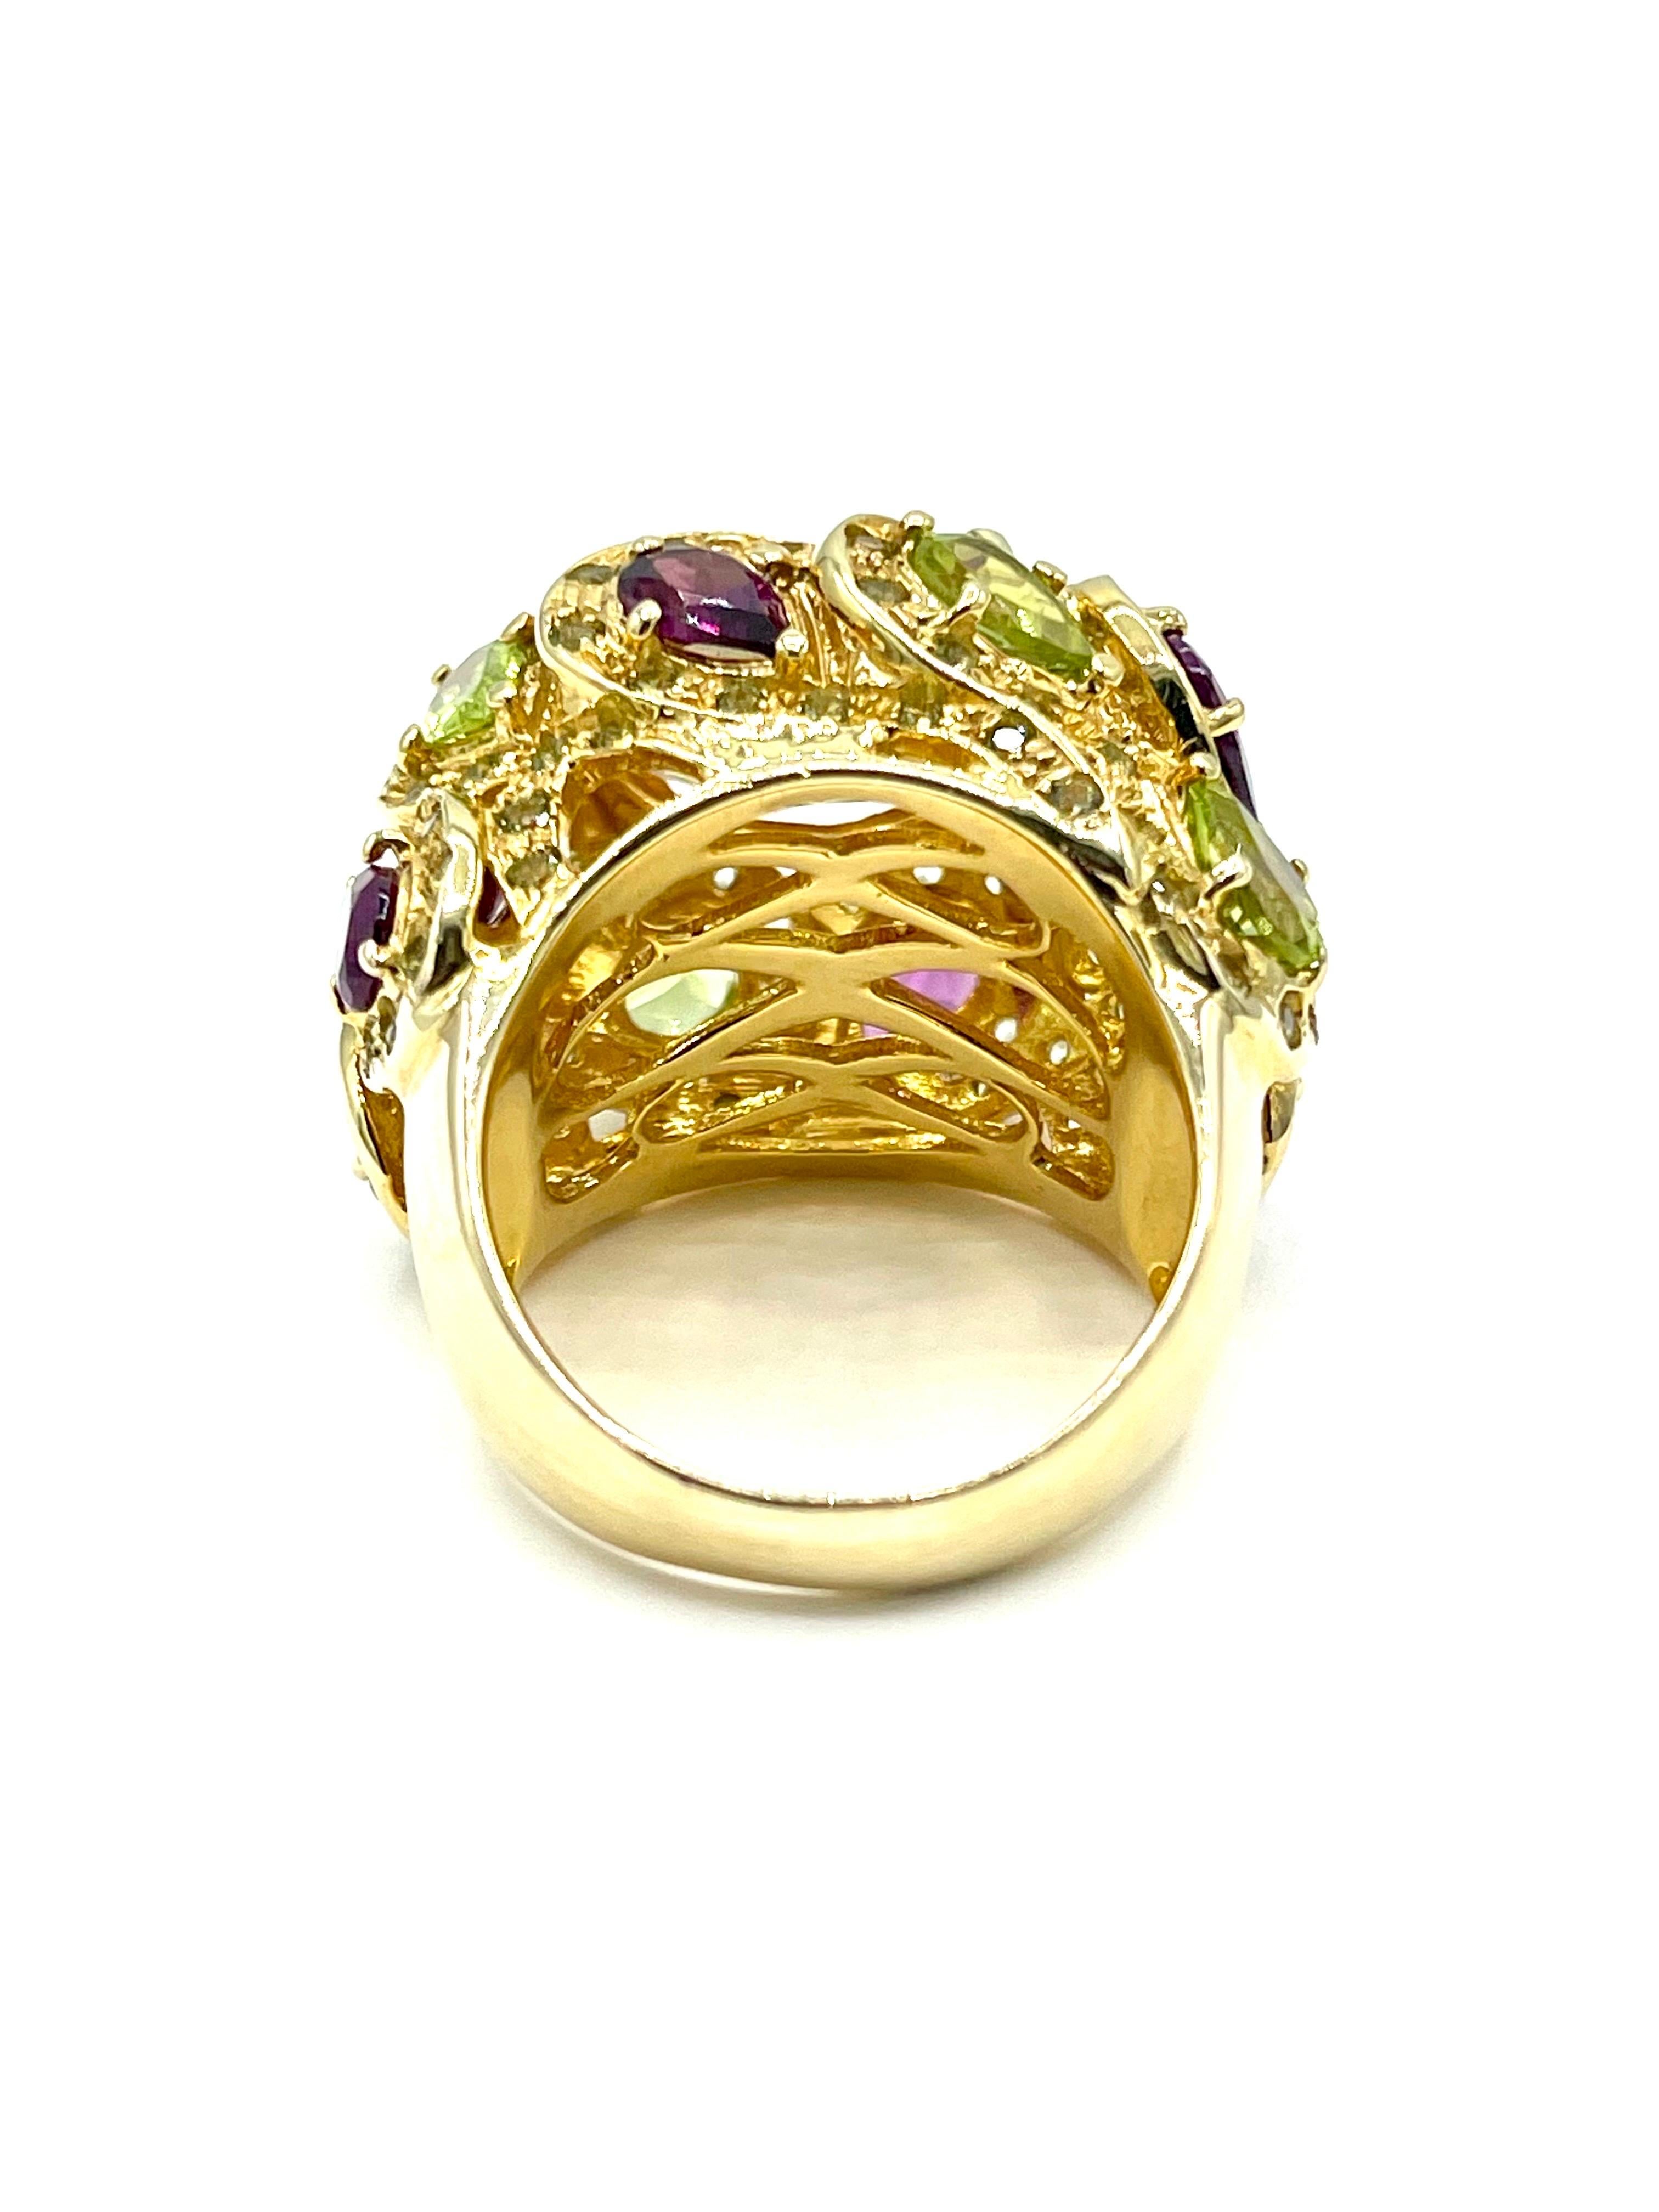 Women's or Men's 3.68 Carat Oval Citrine and Diamond Fashion Cocktail Ring